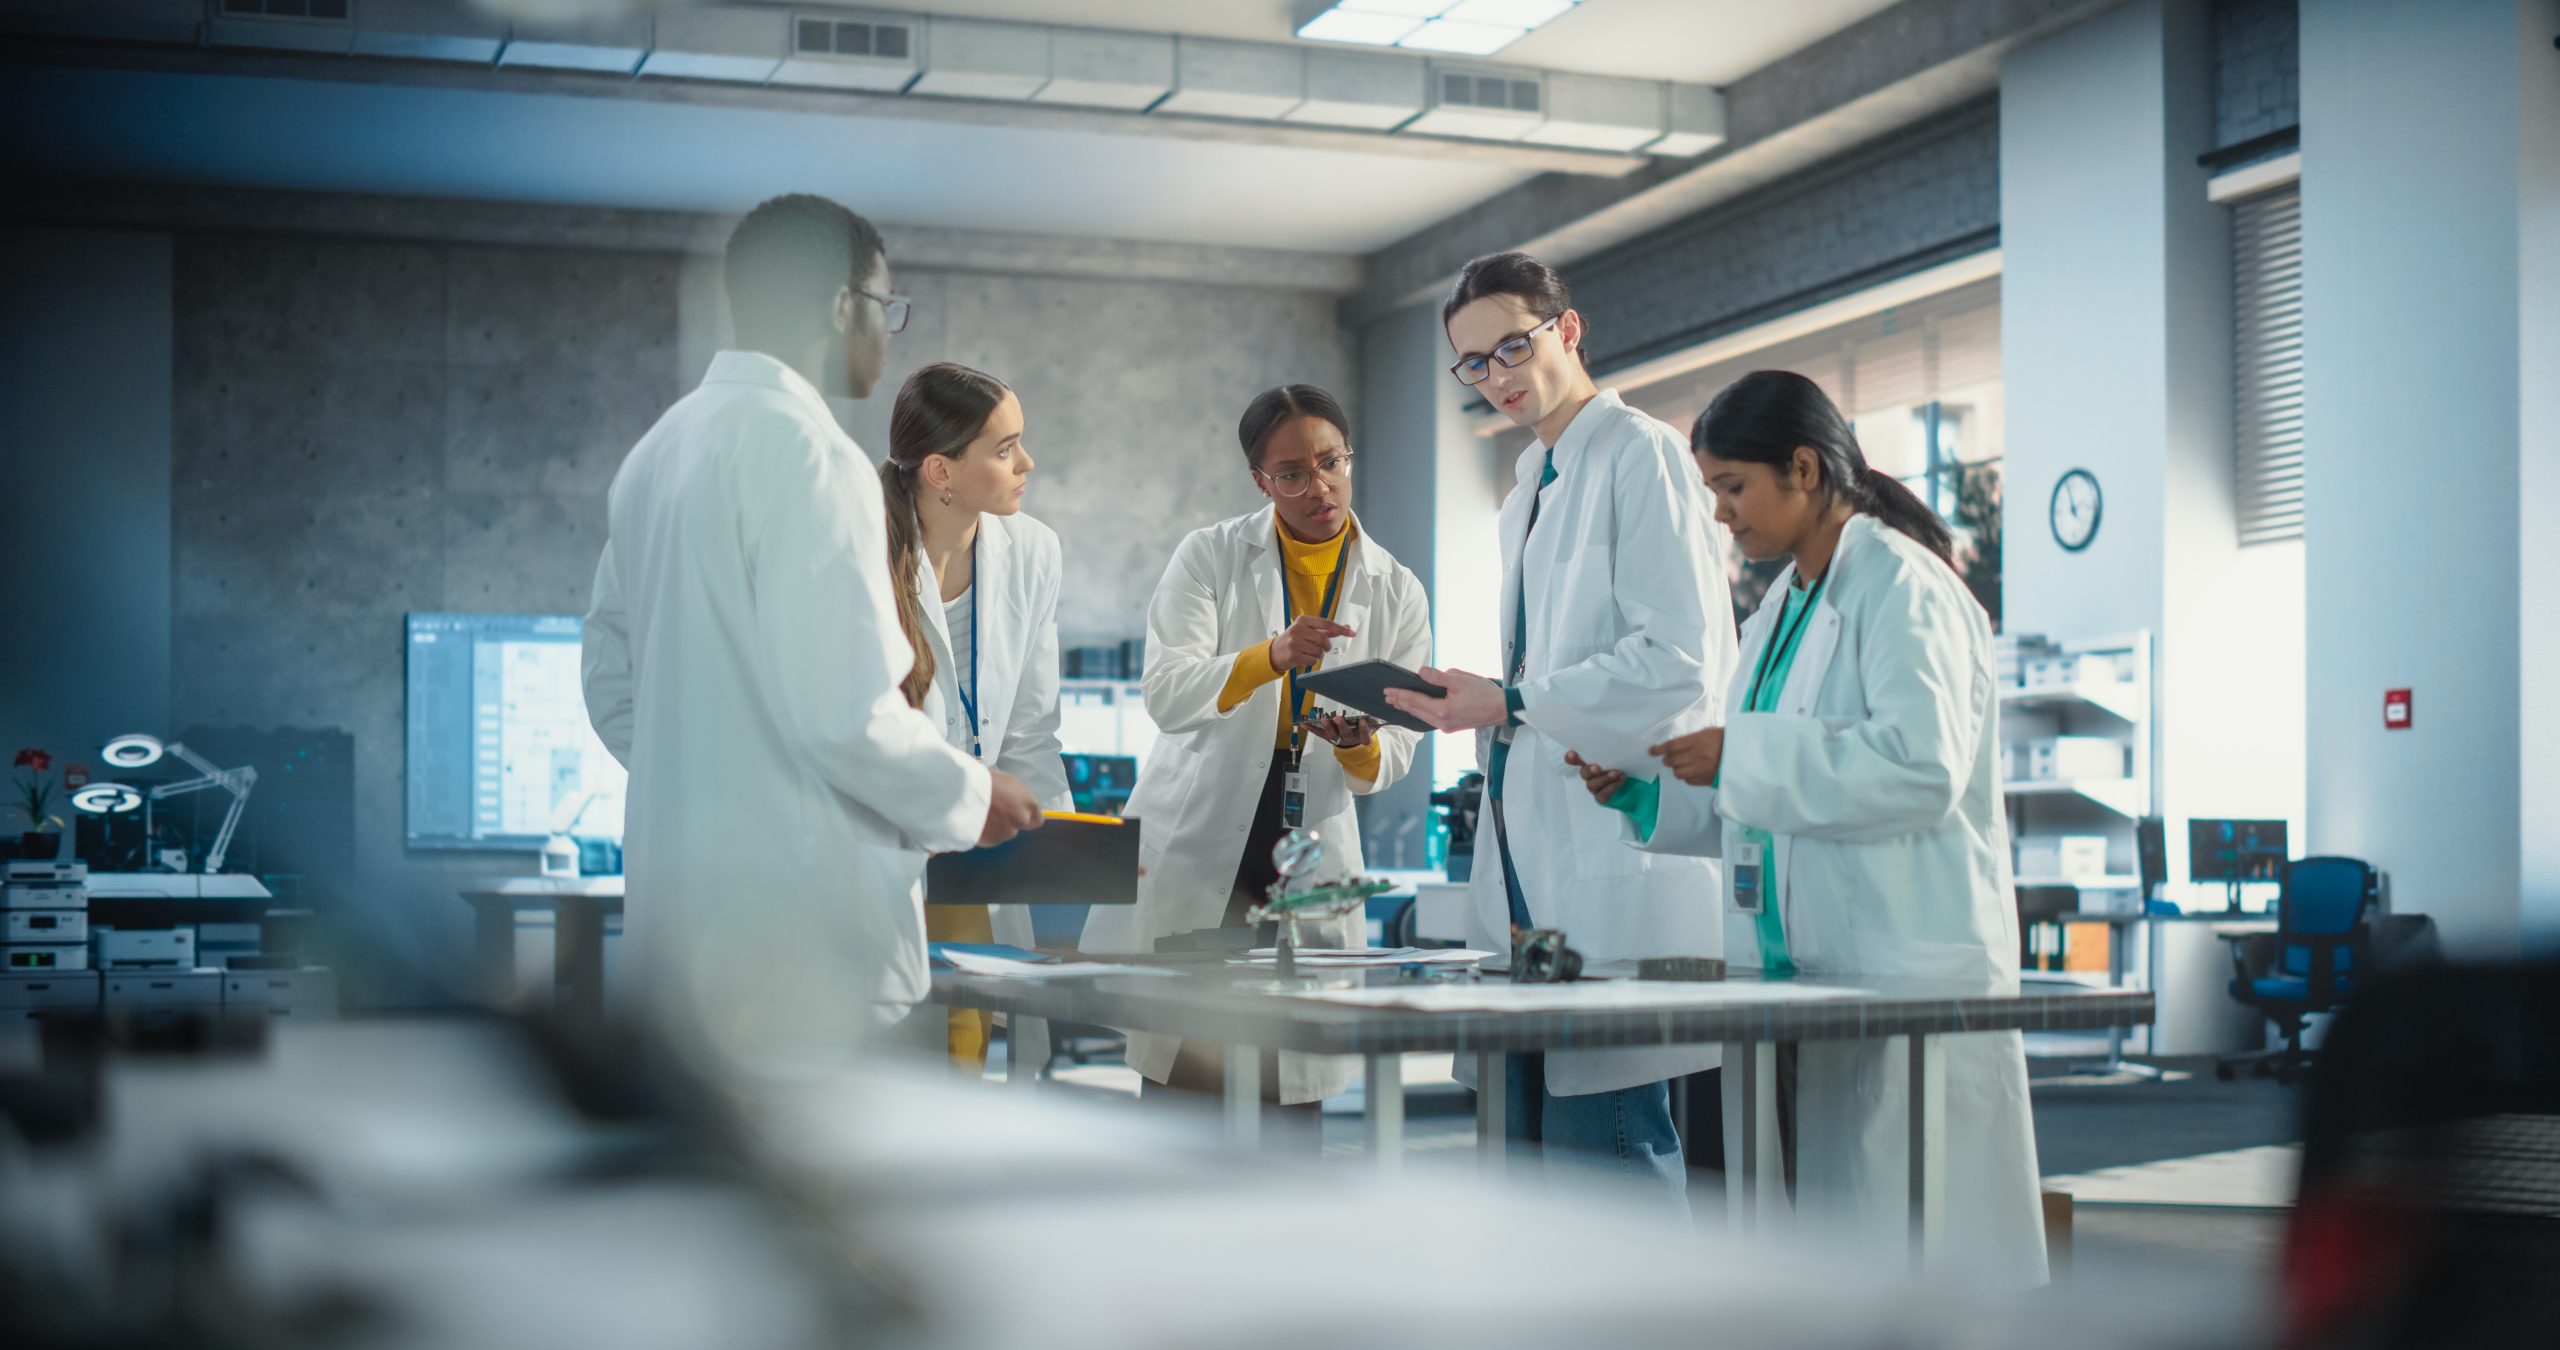 A group of people wearing personal protective equipment, such as lab coats and safety glasses, stand around a work table in an engineering or robotics-type lab, sharing a diversity of ideas about prototypes and documents.